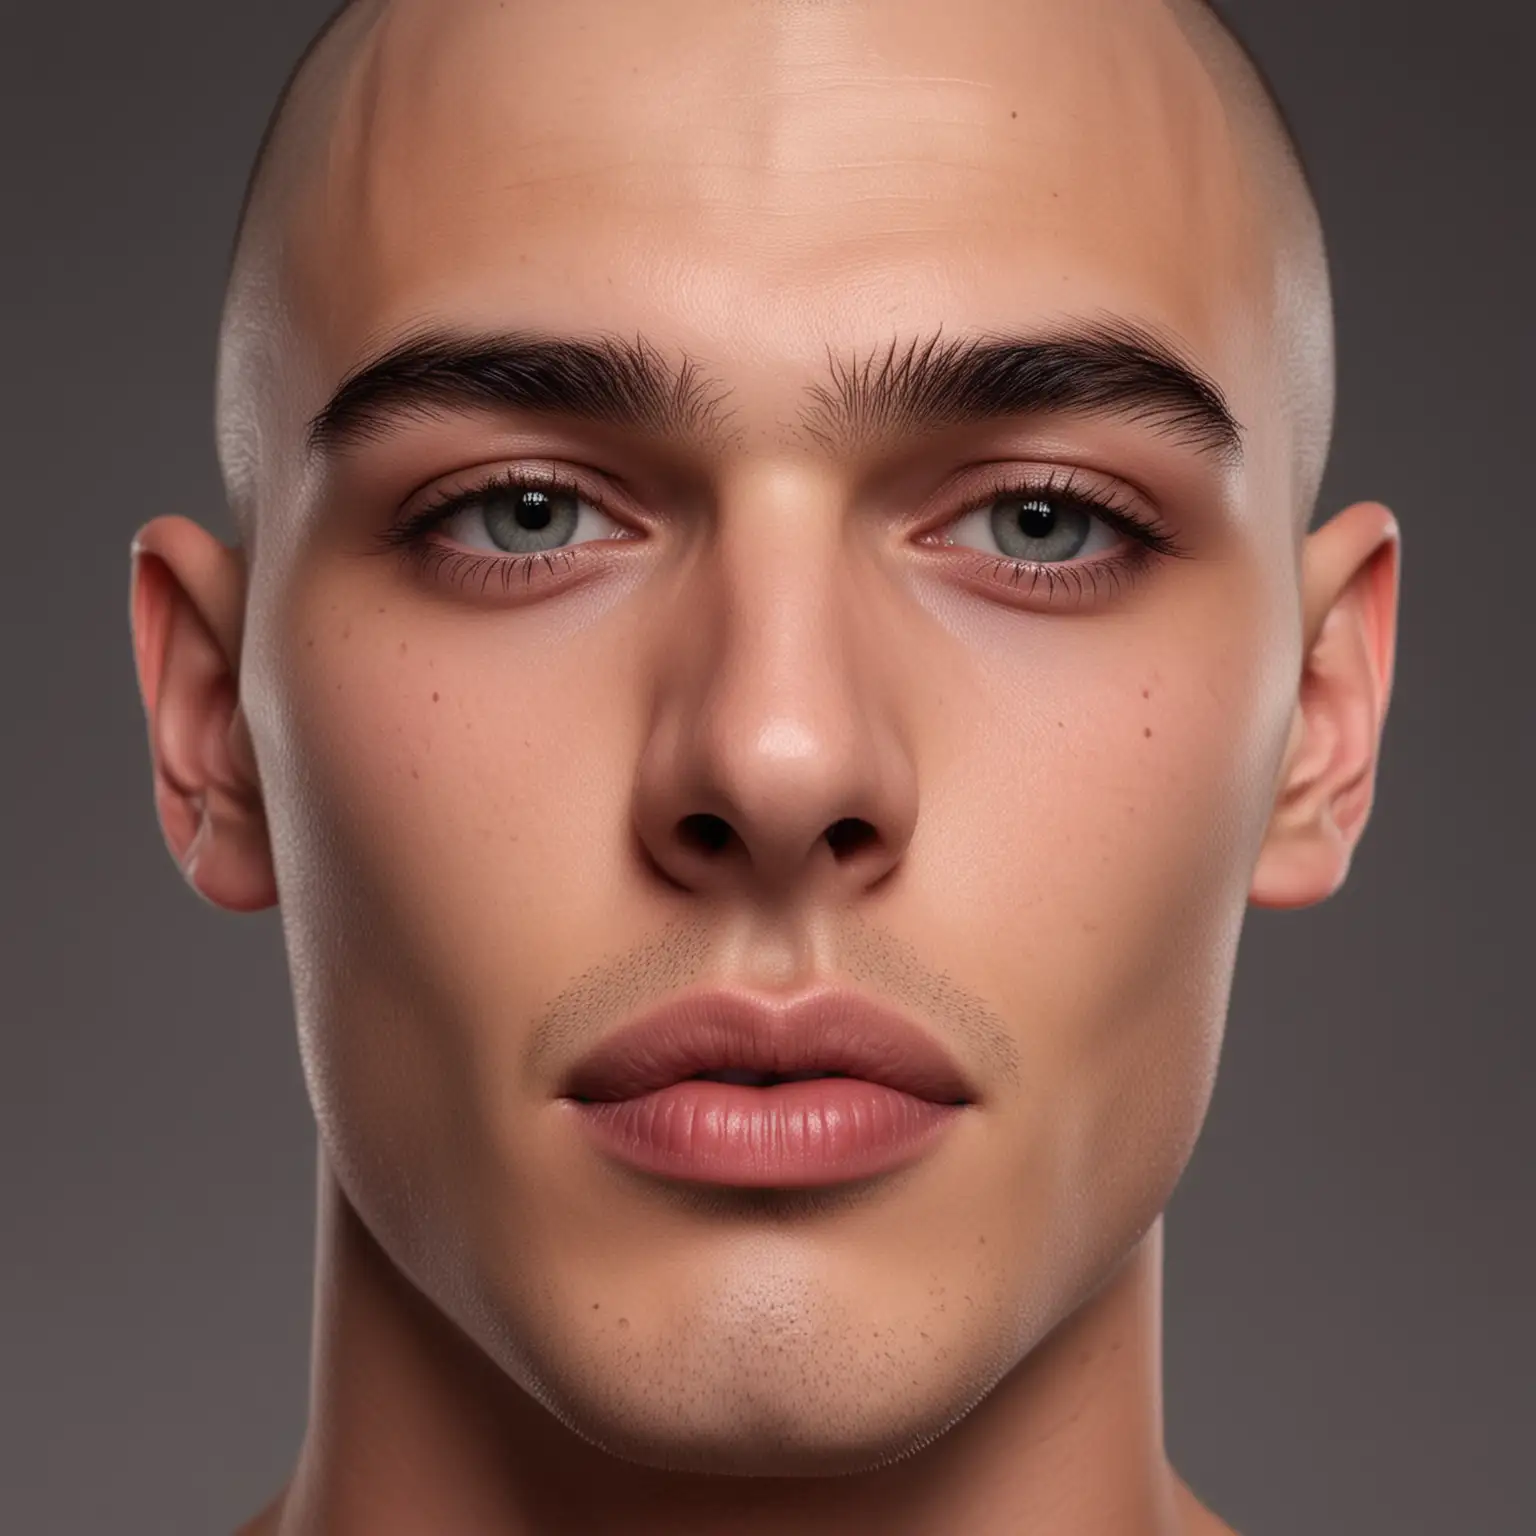 Handsome Bald Male Model with Symmetric Features in High Definition Portrait